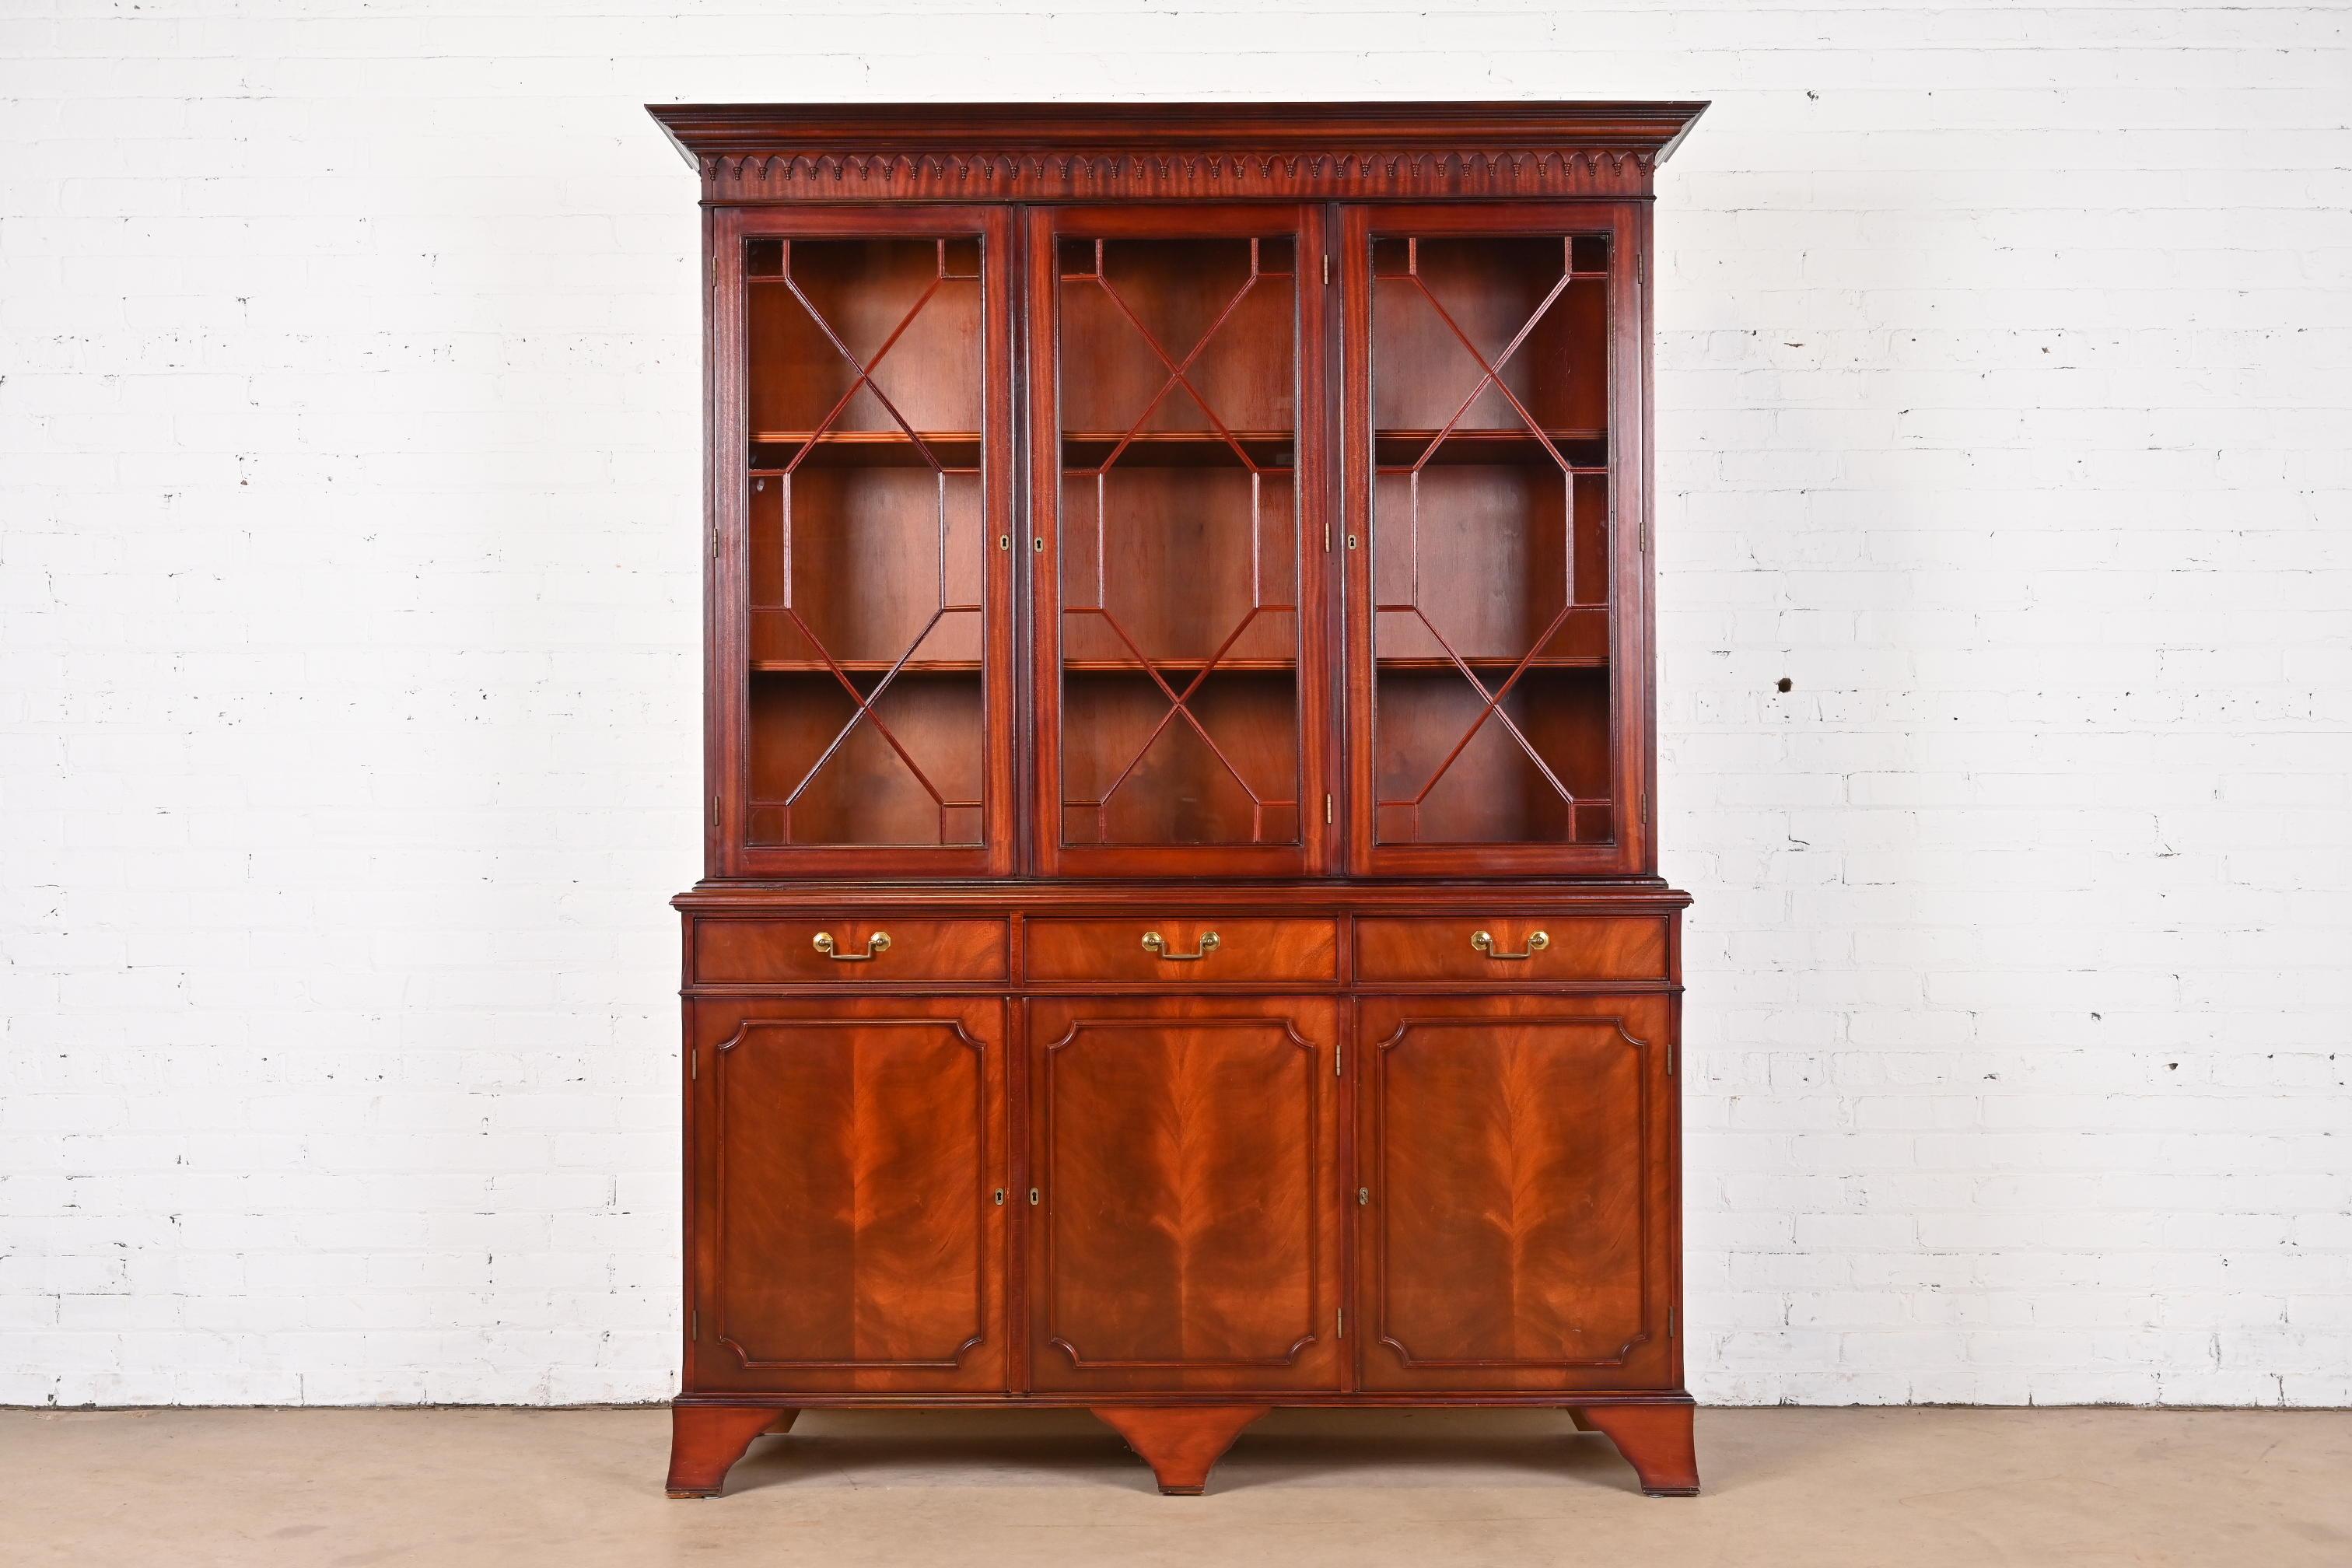 A gorgeous Georgian or Chippendale style breakfront bookcase or dining cabinet

In the manner of Baker Furniture

USA, Late 20th Century

Stunning carved flame mahogany, with mullioned glass front doors, and original brass hardware. Cabinets lock,